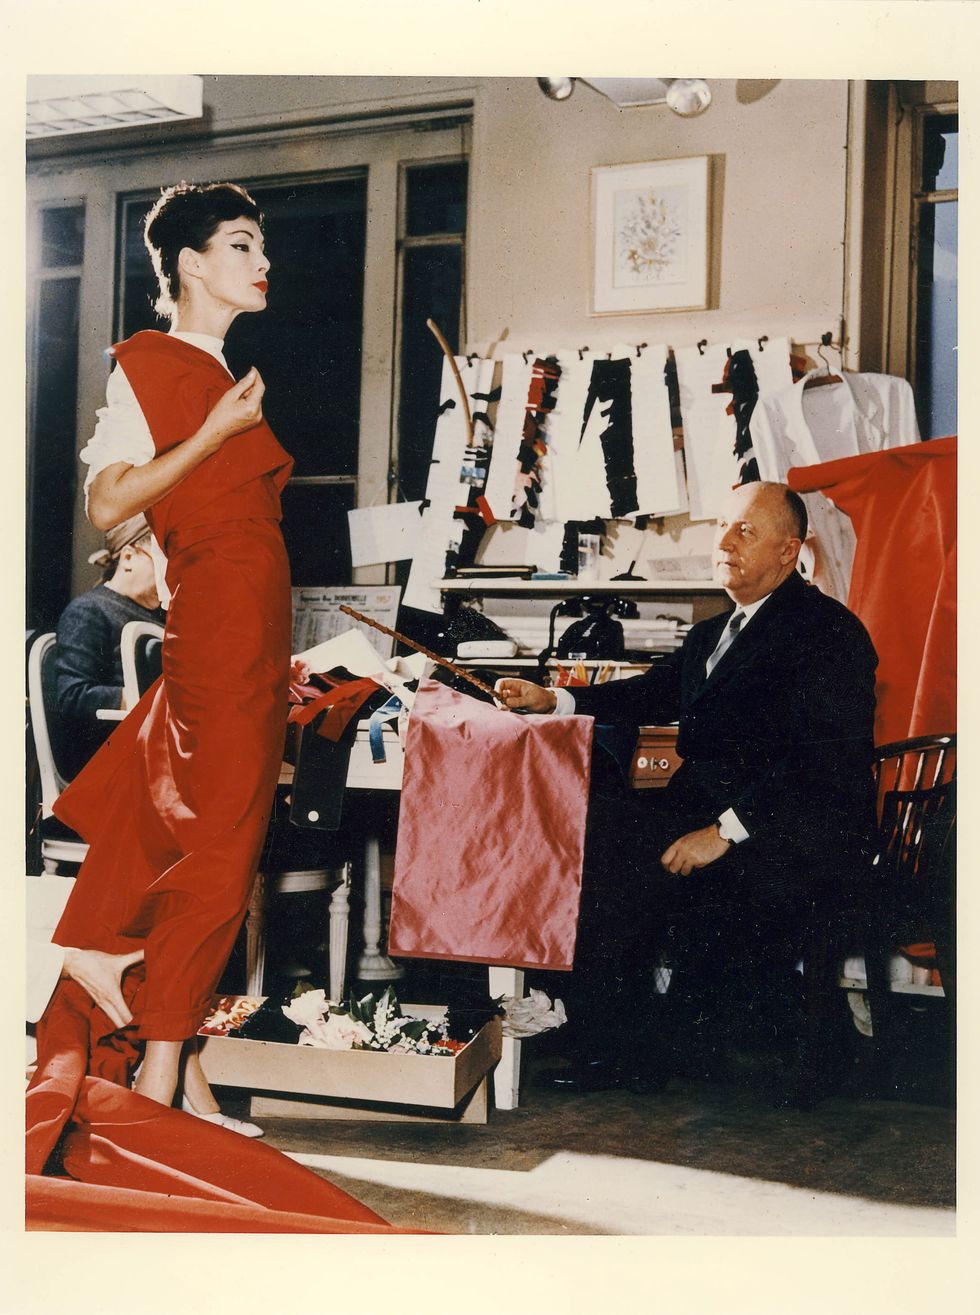 Celebrating 70 Years of Christian Dior - The New York Times